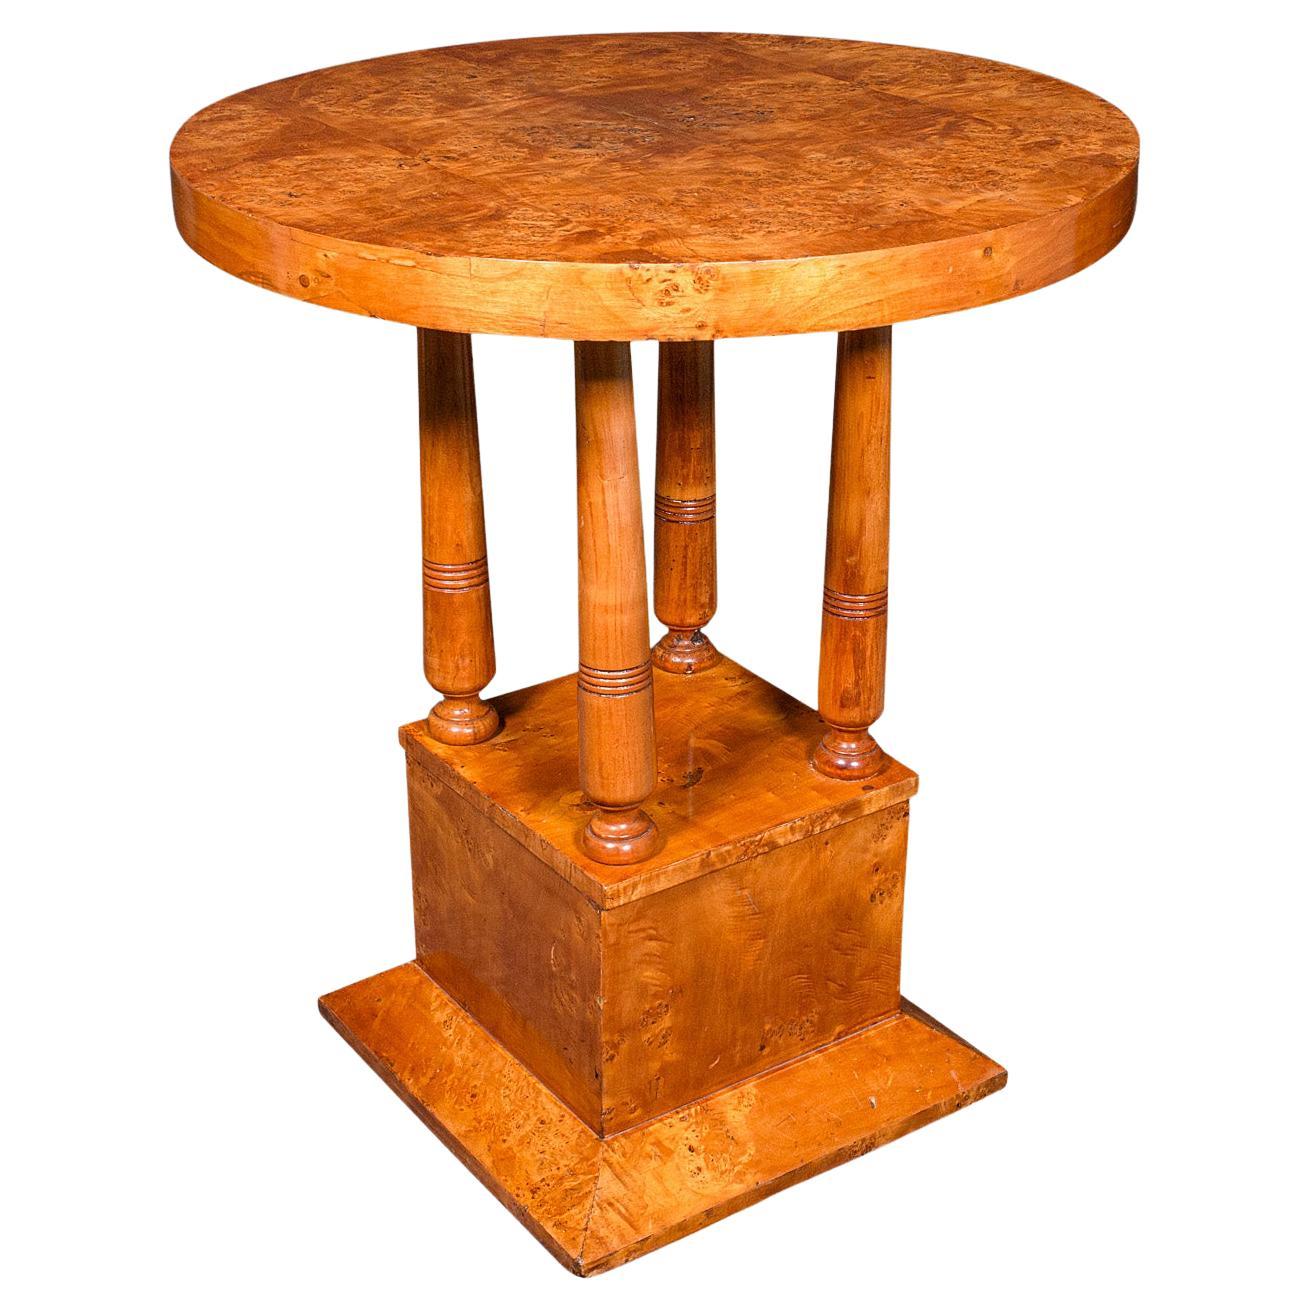 Vintage Podium Hall Table, French, Birds Eye Maple, Lamp, Side, Art Deco, C.1930 For Sale